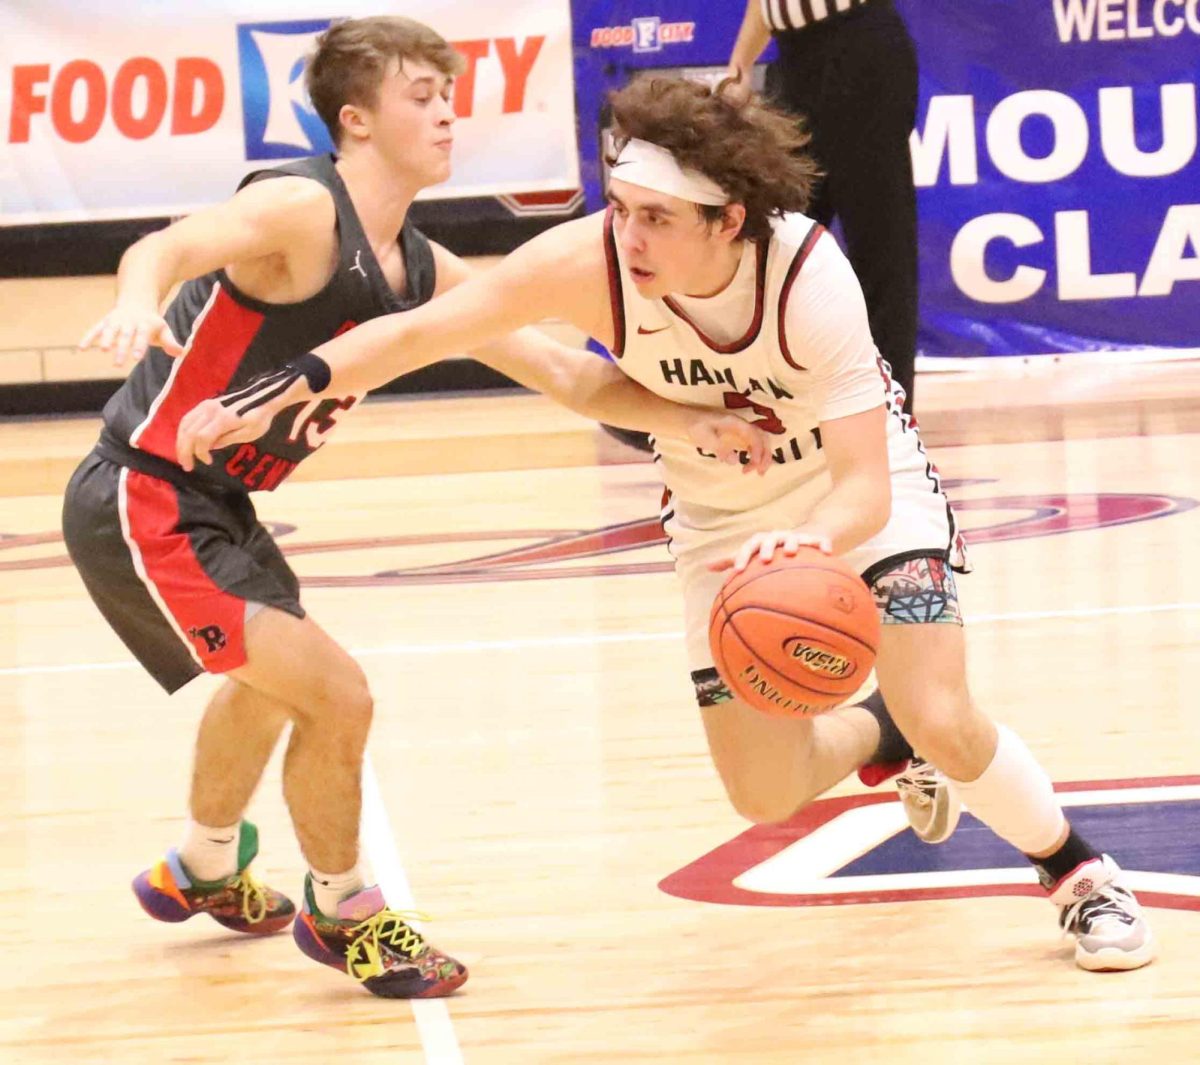 Junior guard Maddox Huff, pictured in action earlier this season, scored 30 points on Thursday as Harlan County coasted past Butler County 93-74 in the King of the Bluegrass tournament in Louisville.